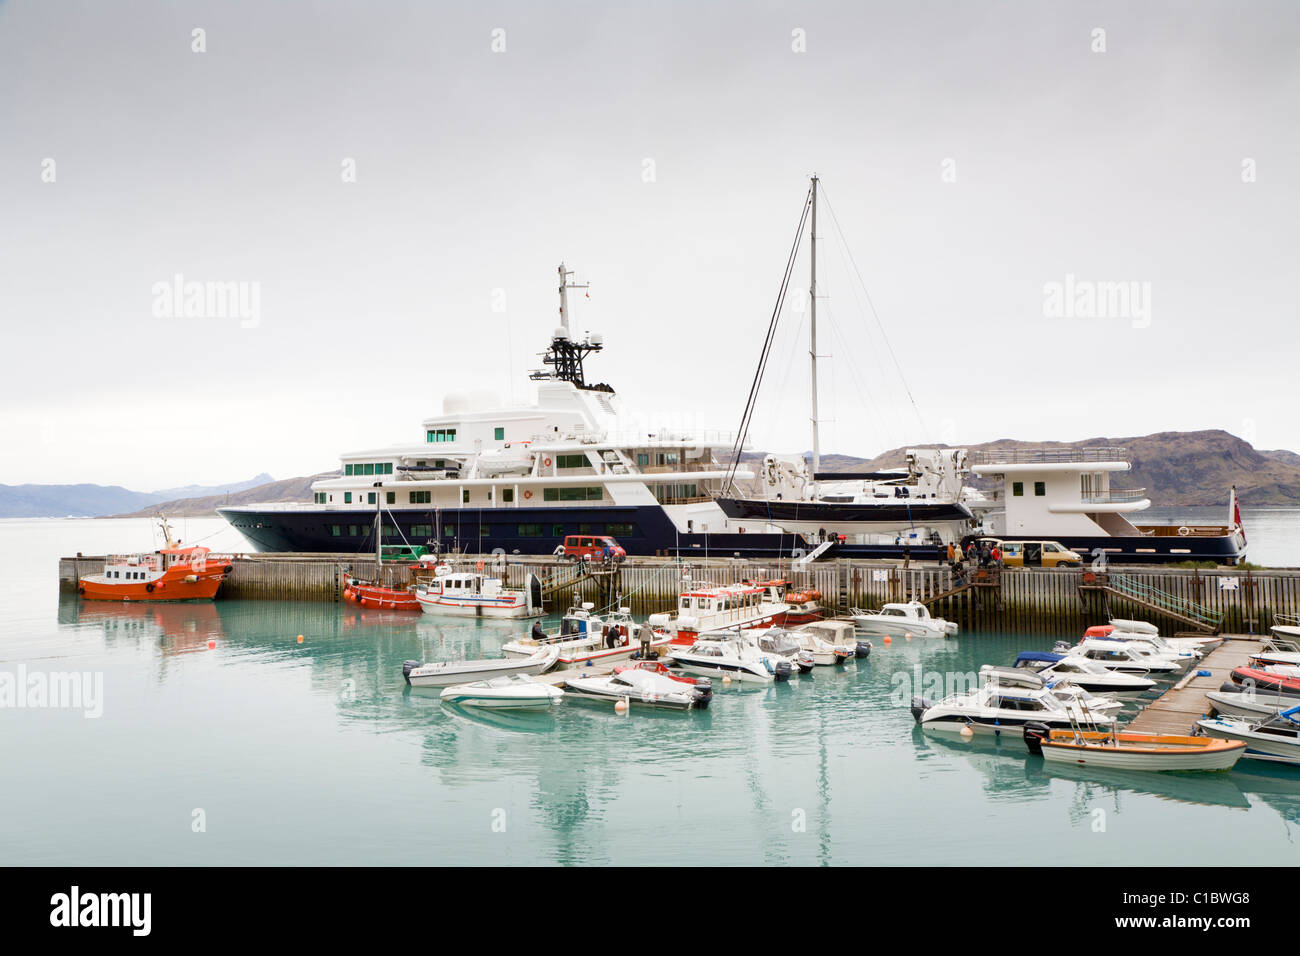 Luxury private yacht Le Grand Bleu at the harbour in Narsarsuaq, South Greenland Stock Photo